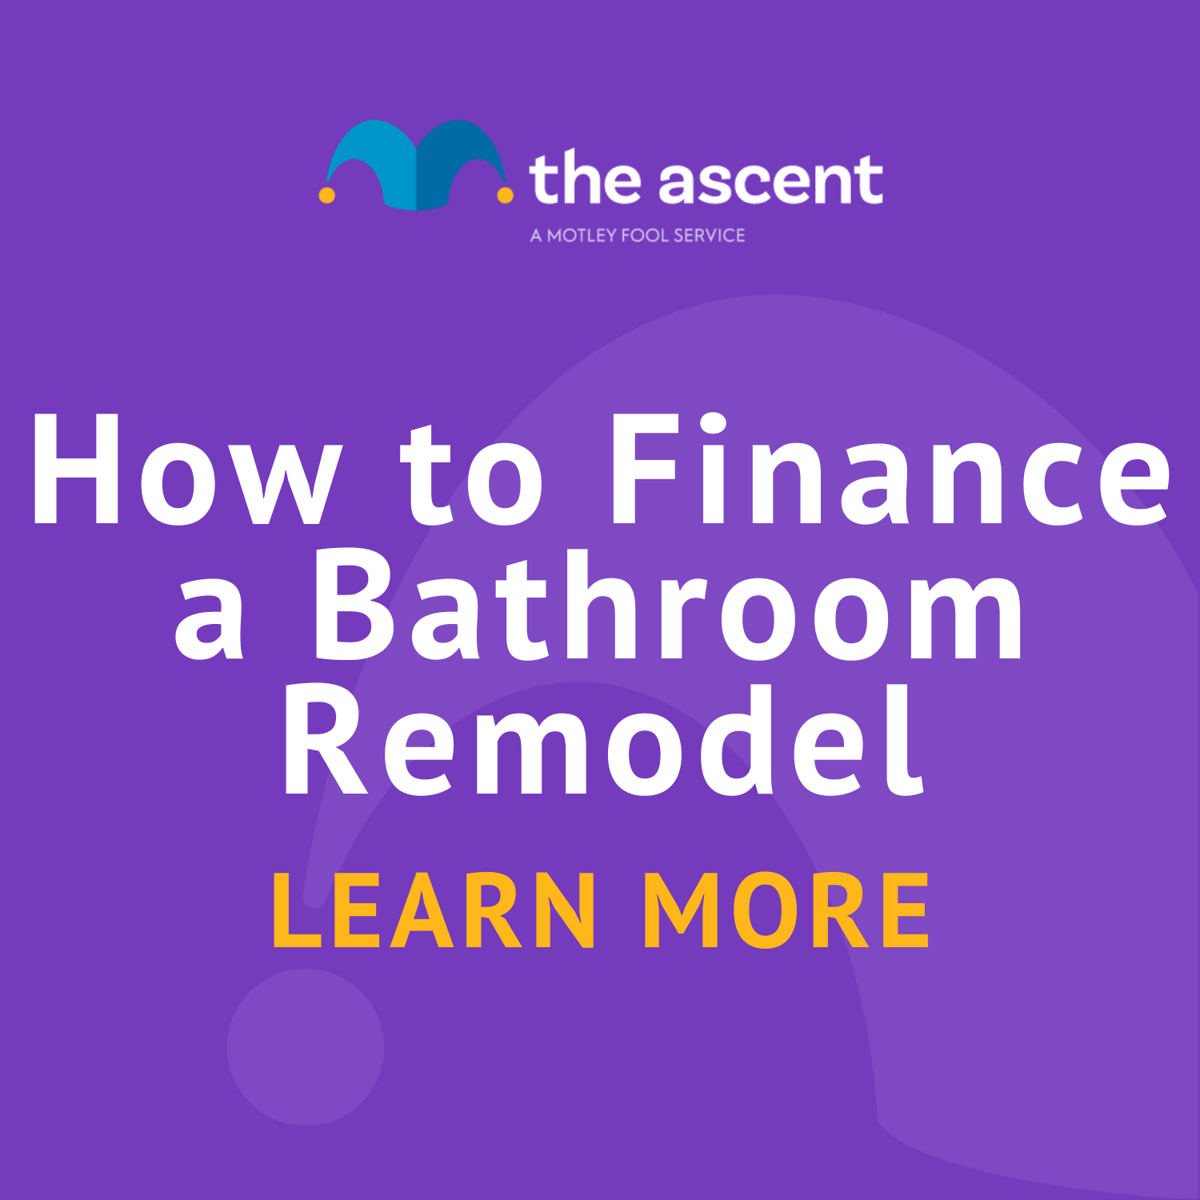 How to Finance a Bathroom Remodel